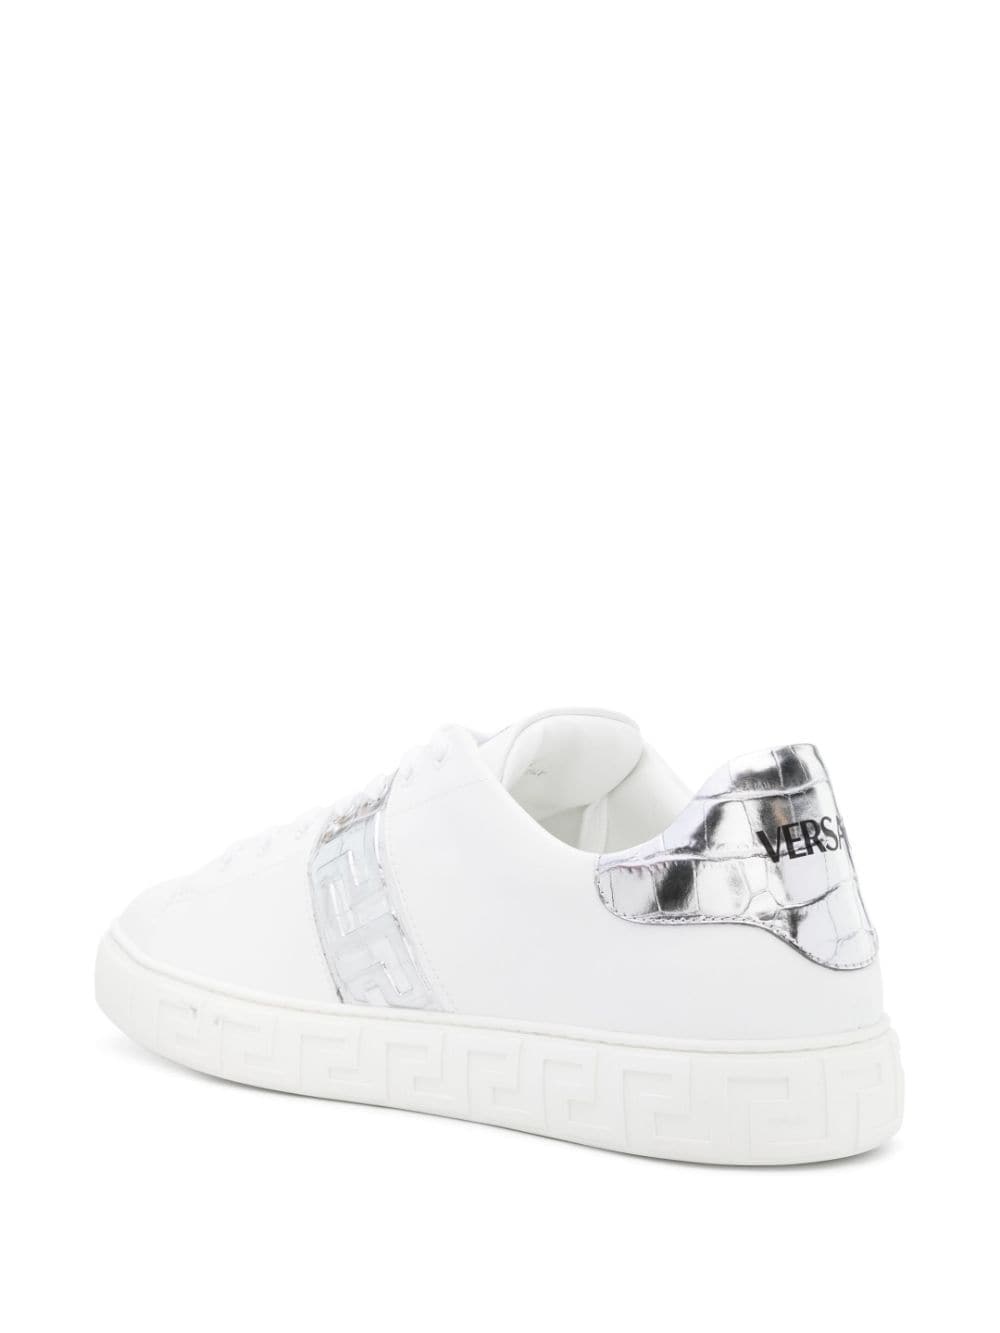 Greca-detail leather sneakers - 3